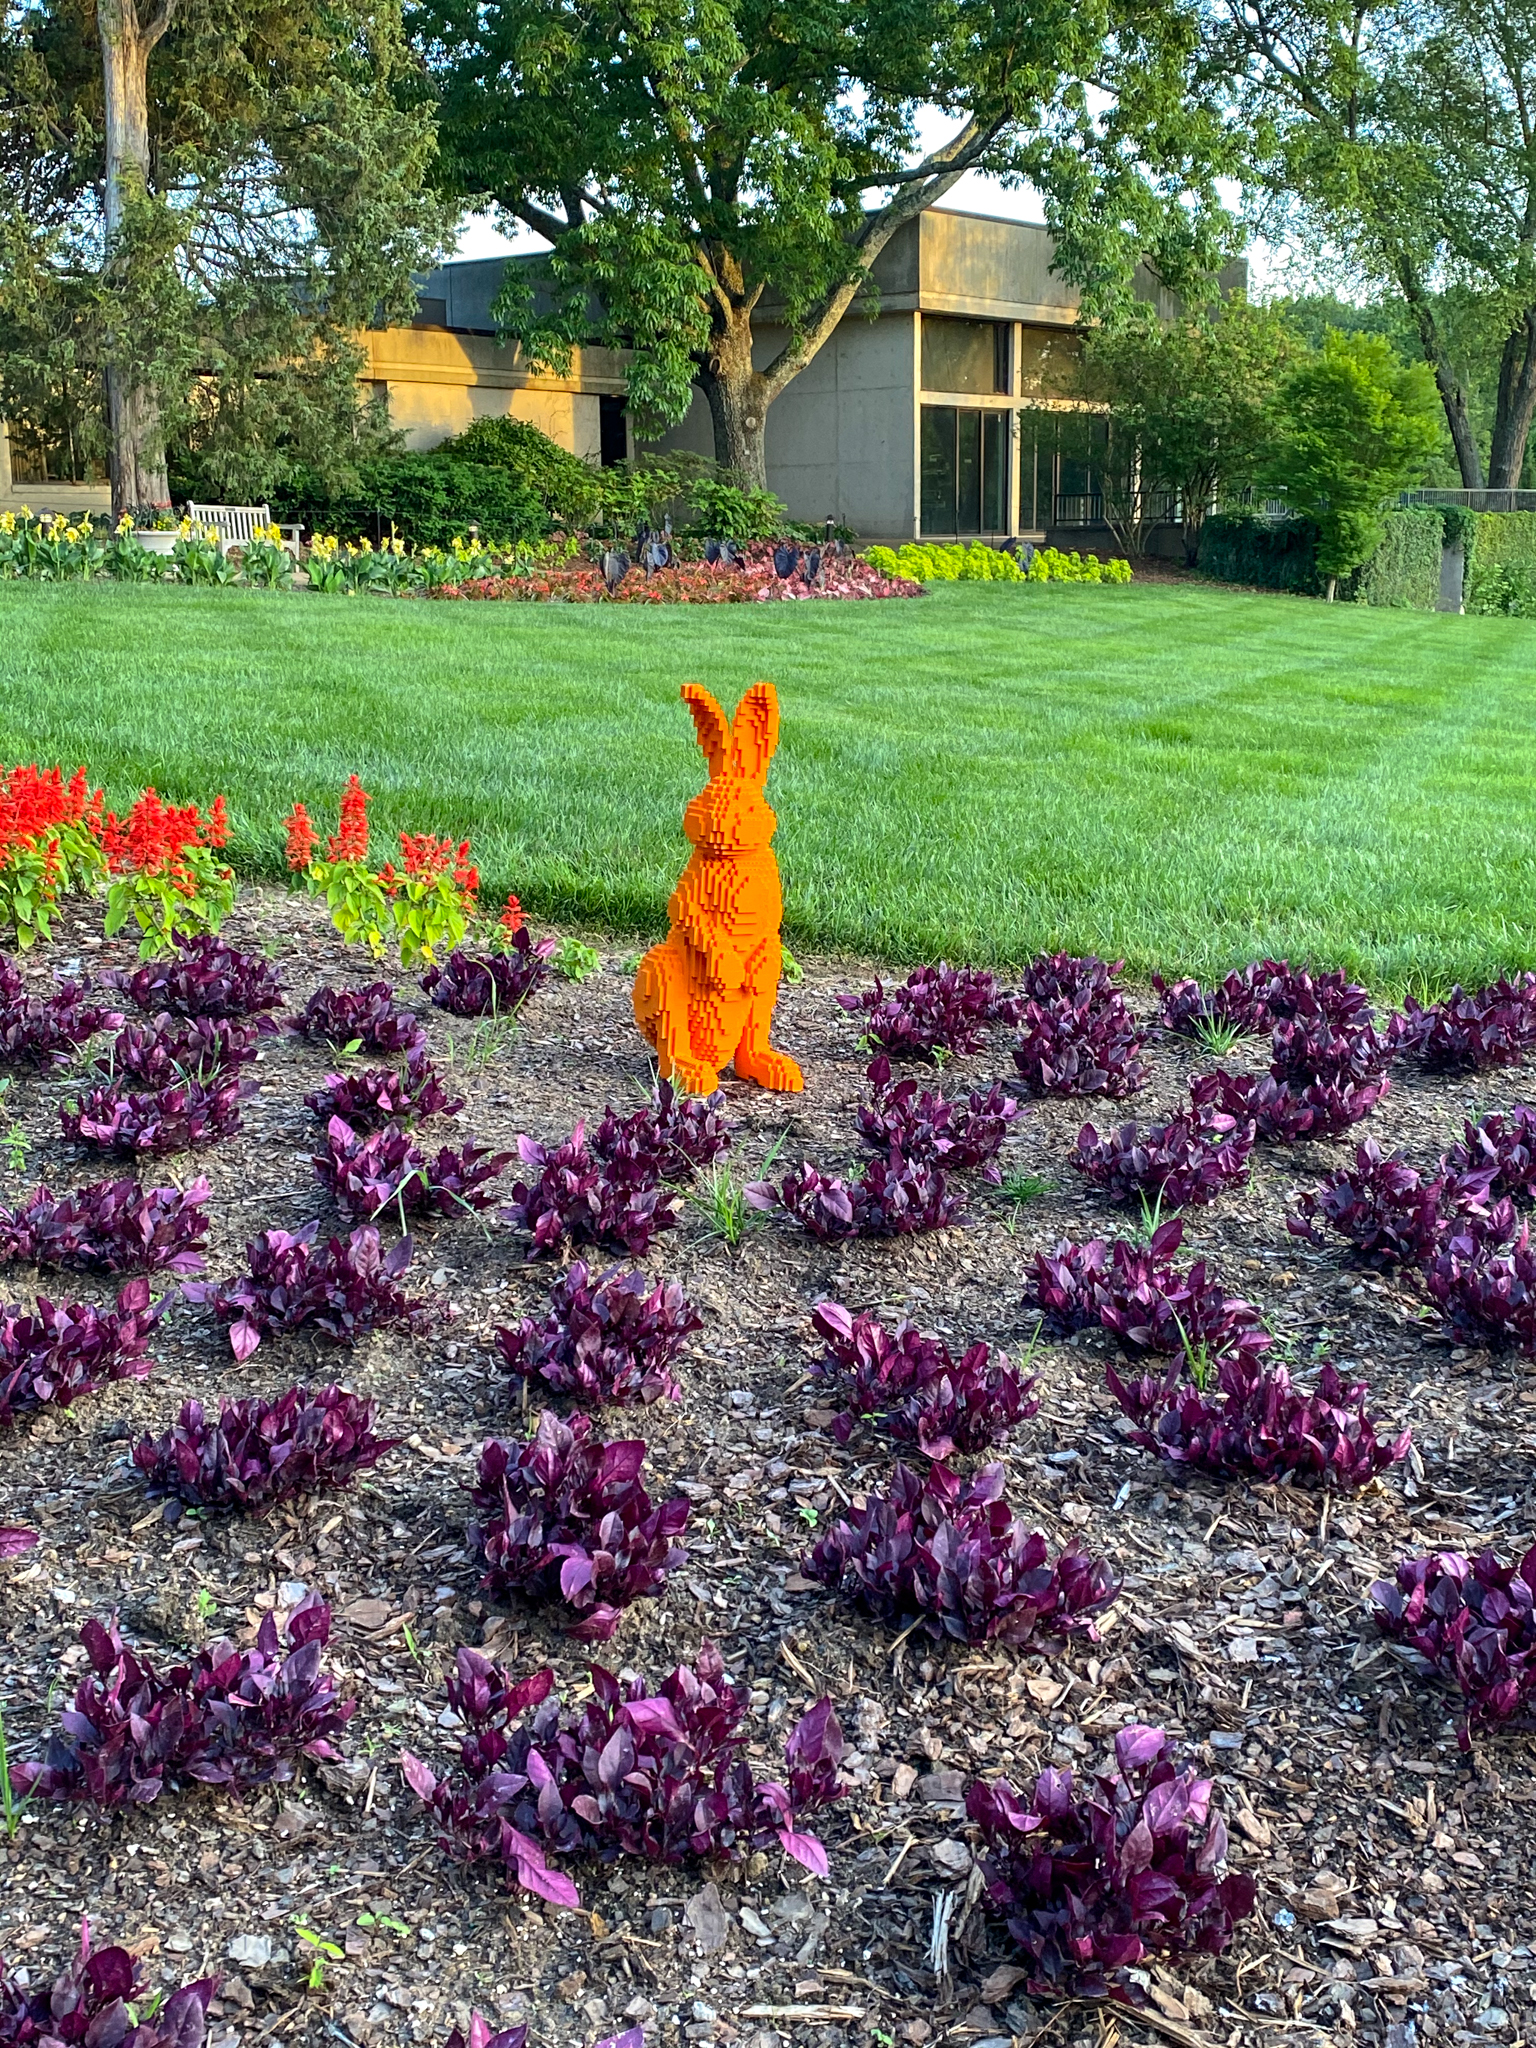 Standing orange Lego rabbit surrounded by purple foliage annuals and a grass lawn behind